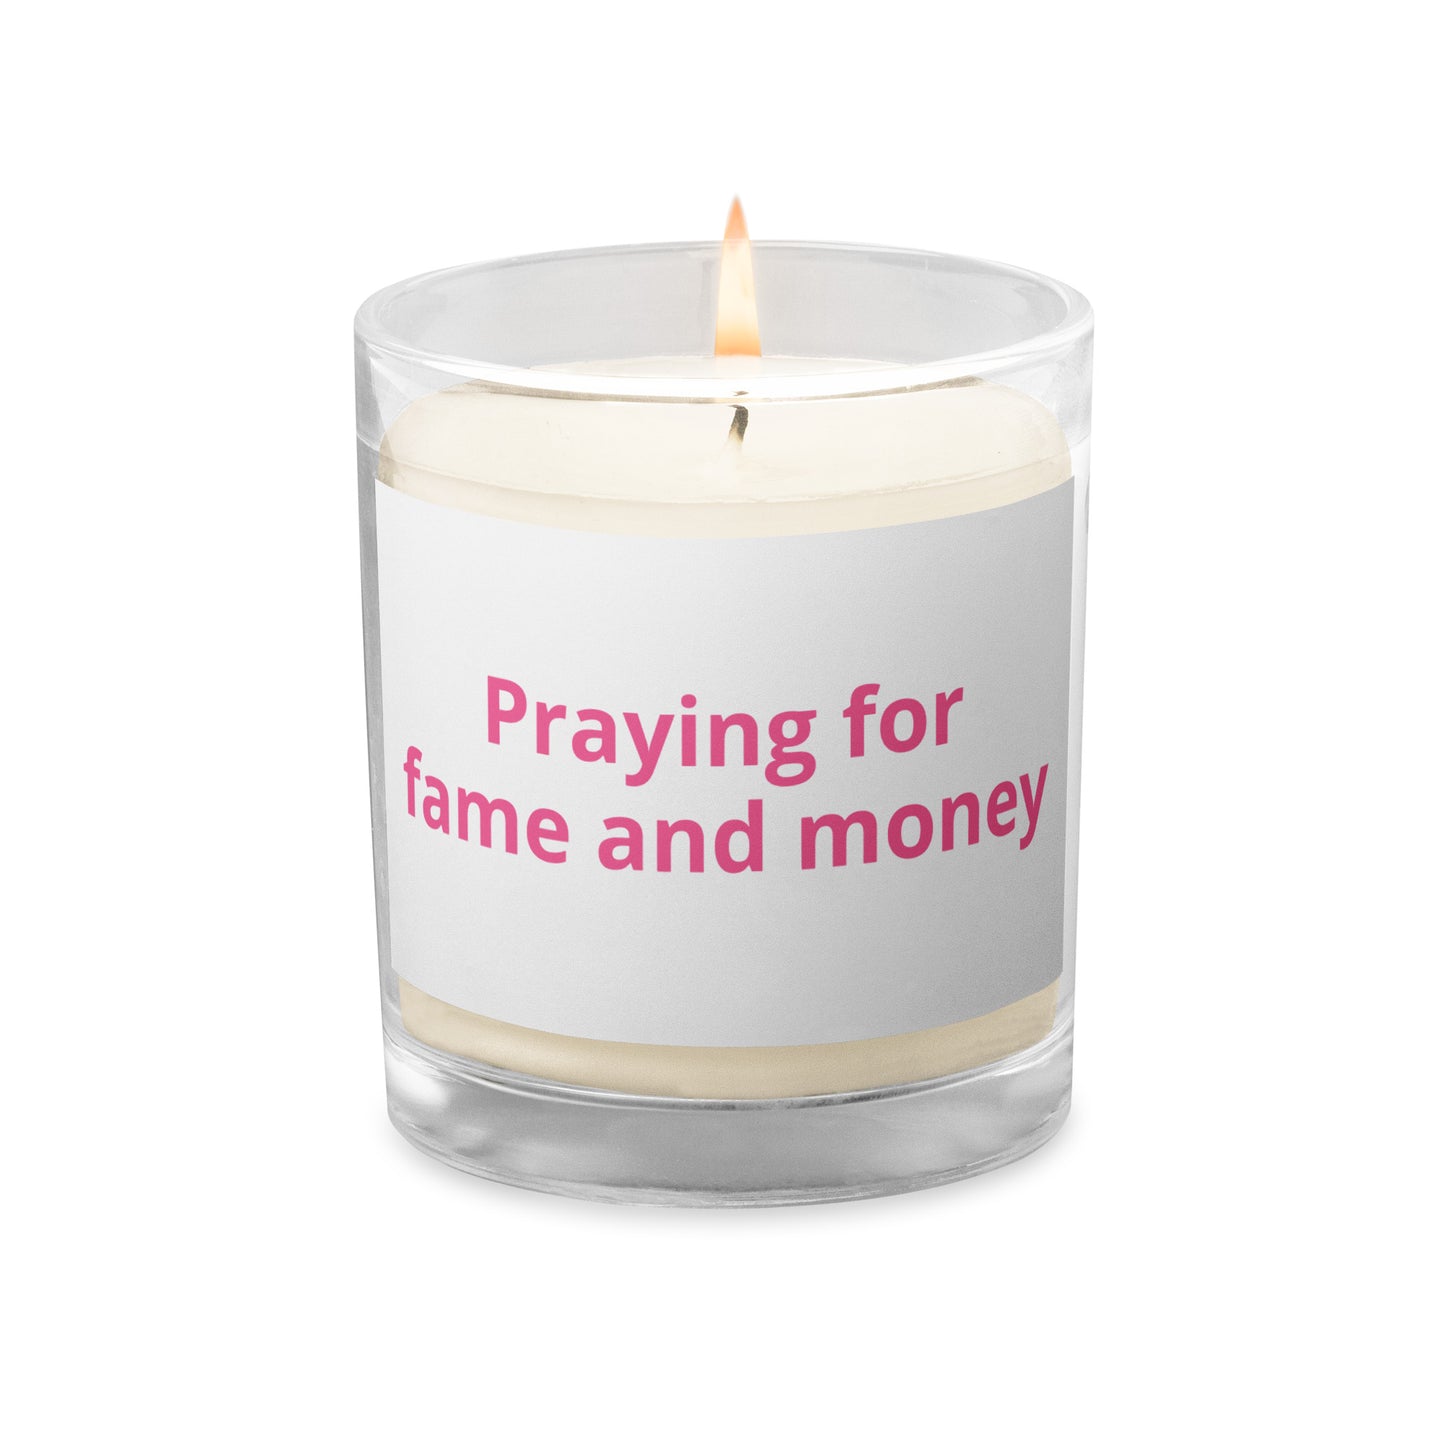 Praying for fame and money wax candle